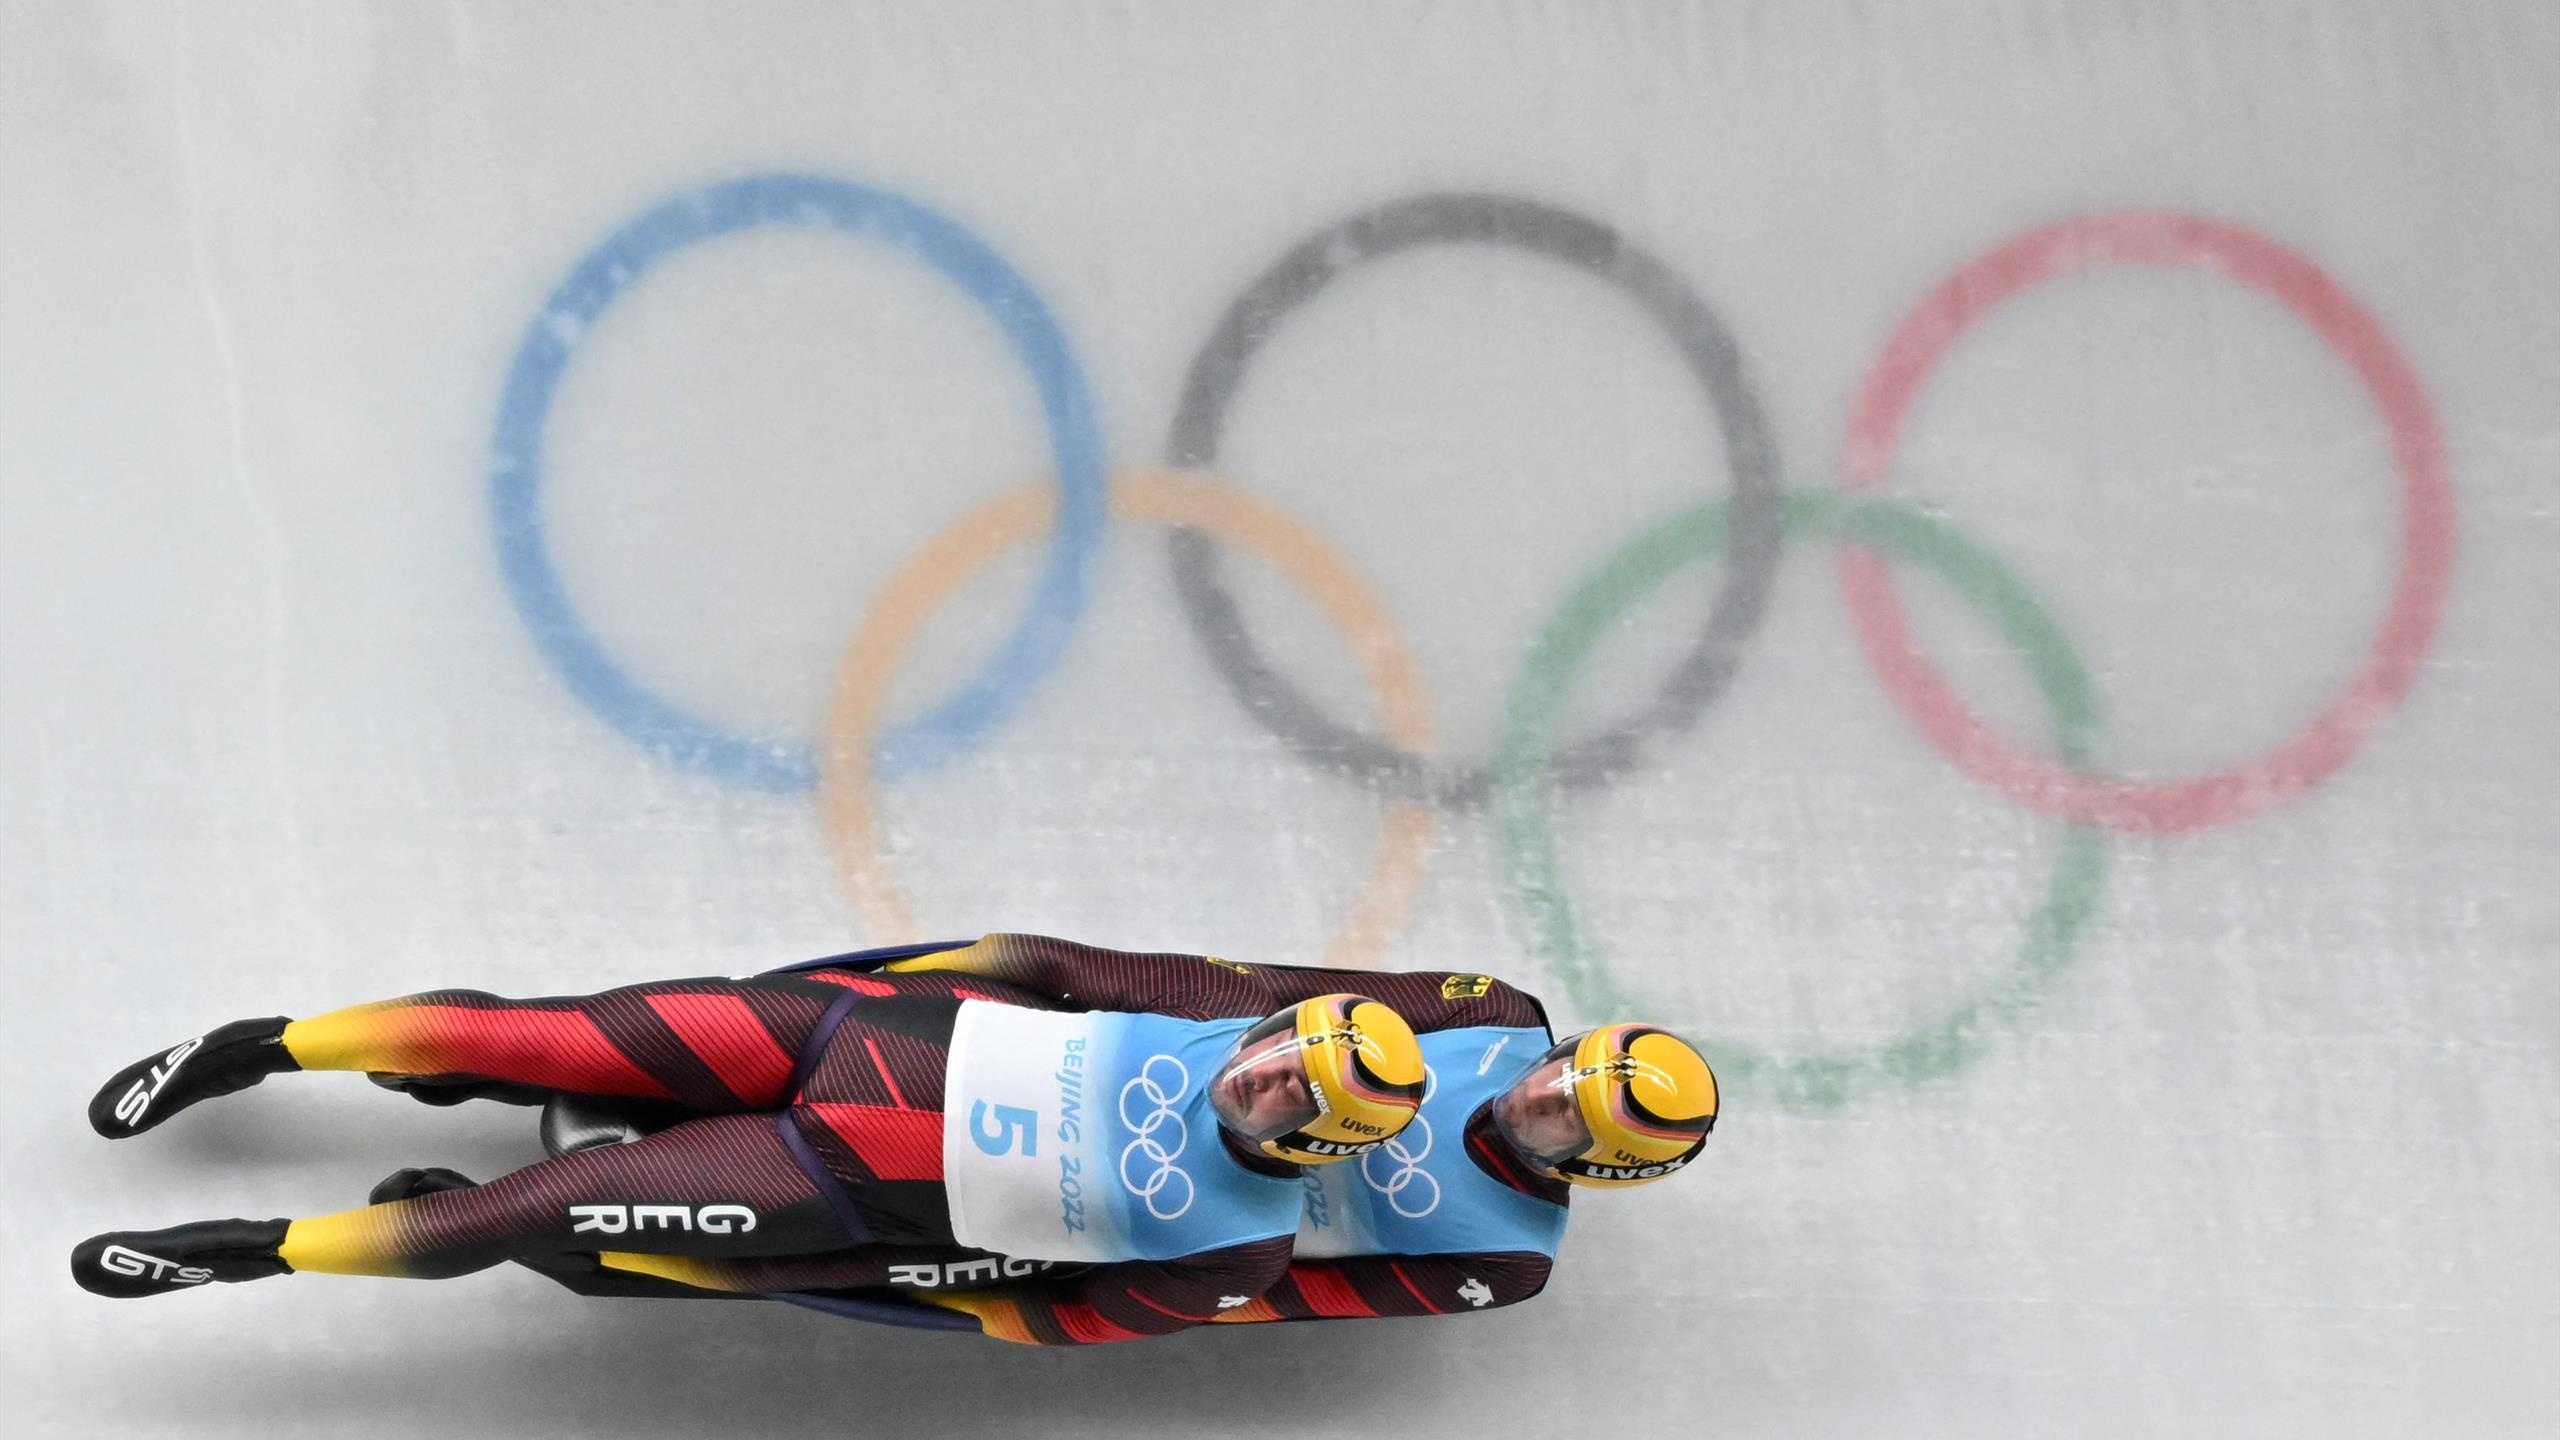 Luge: Tobias Wendl and Tobias Arlt, The doubles event at the 2022 Beijing Winter Olympics. 2560x1440 HD Wallpaper.